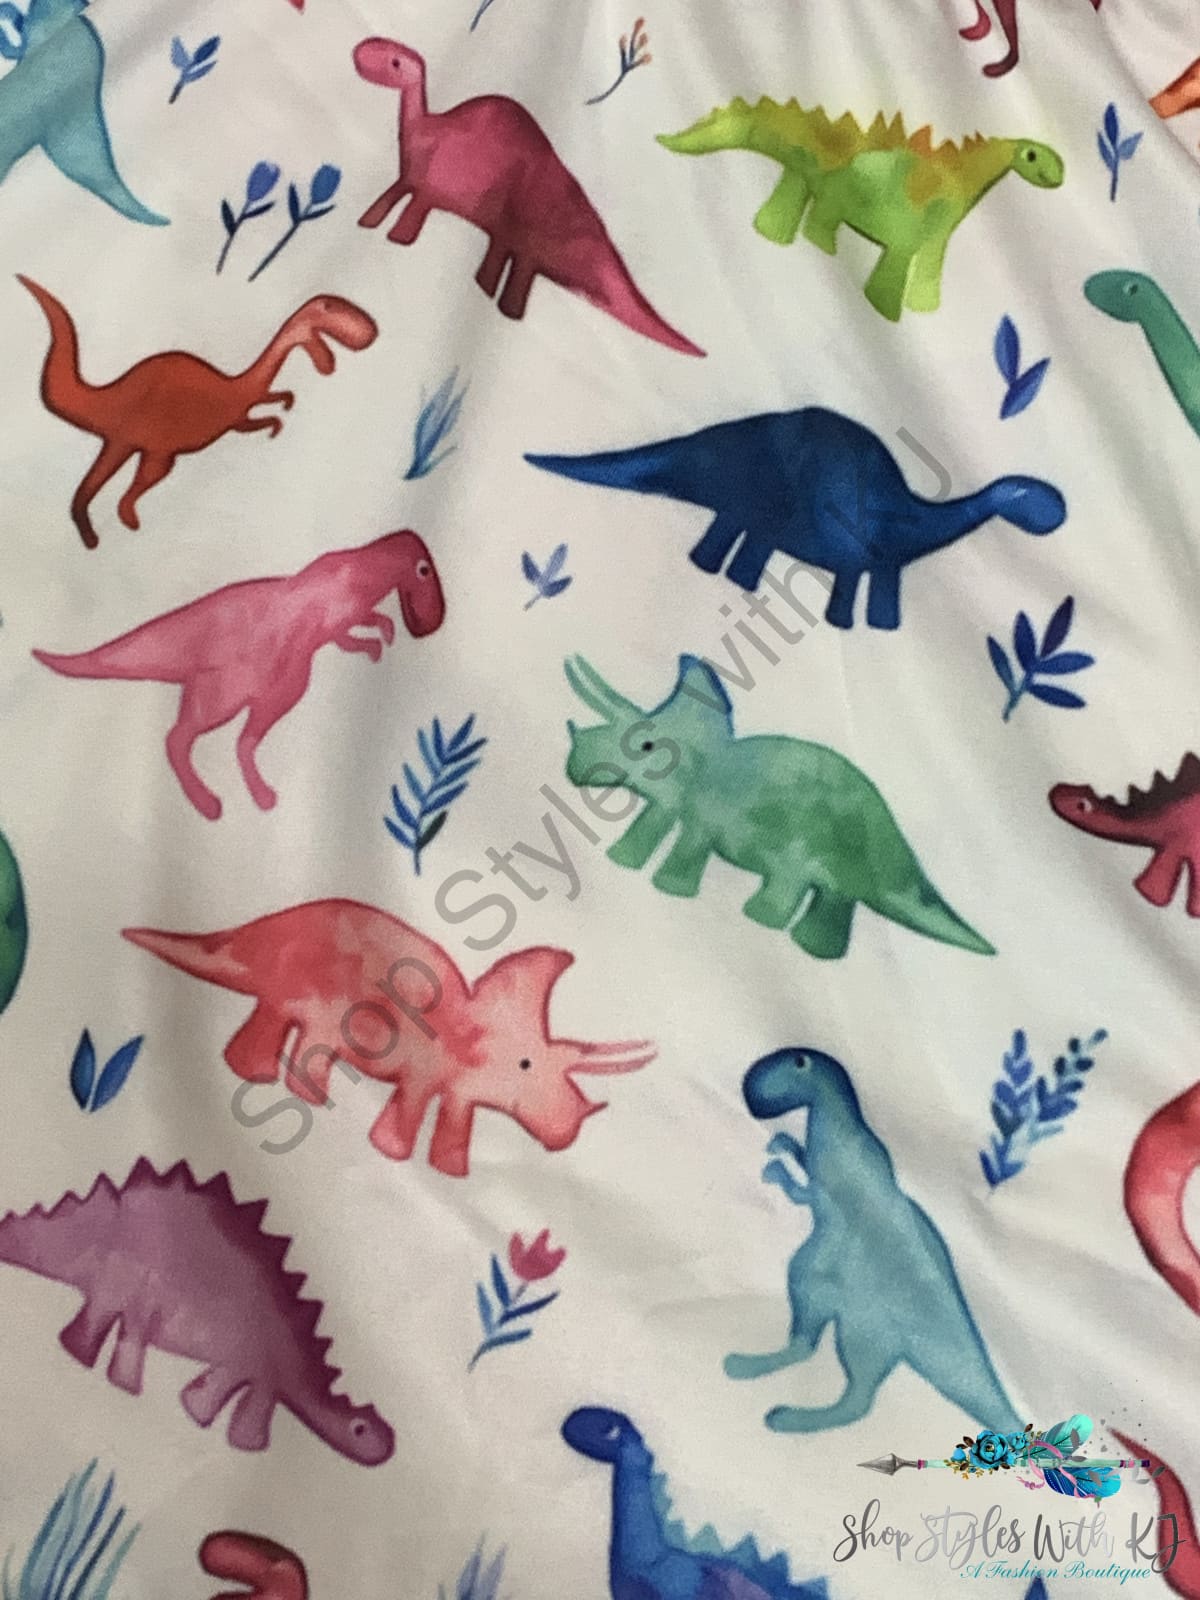 Out In The Wild Dinosaur Dress Kids